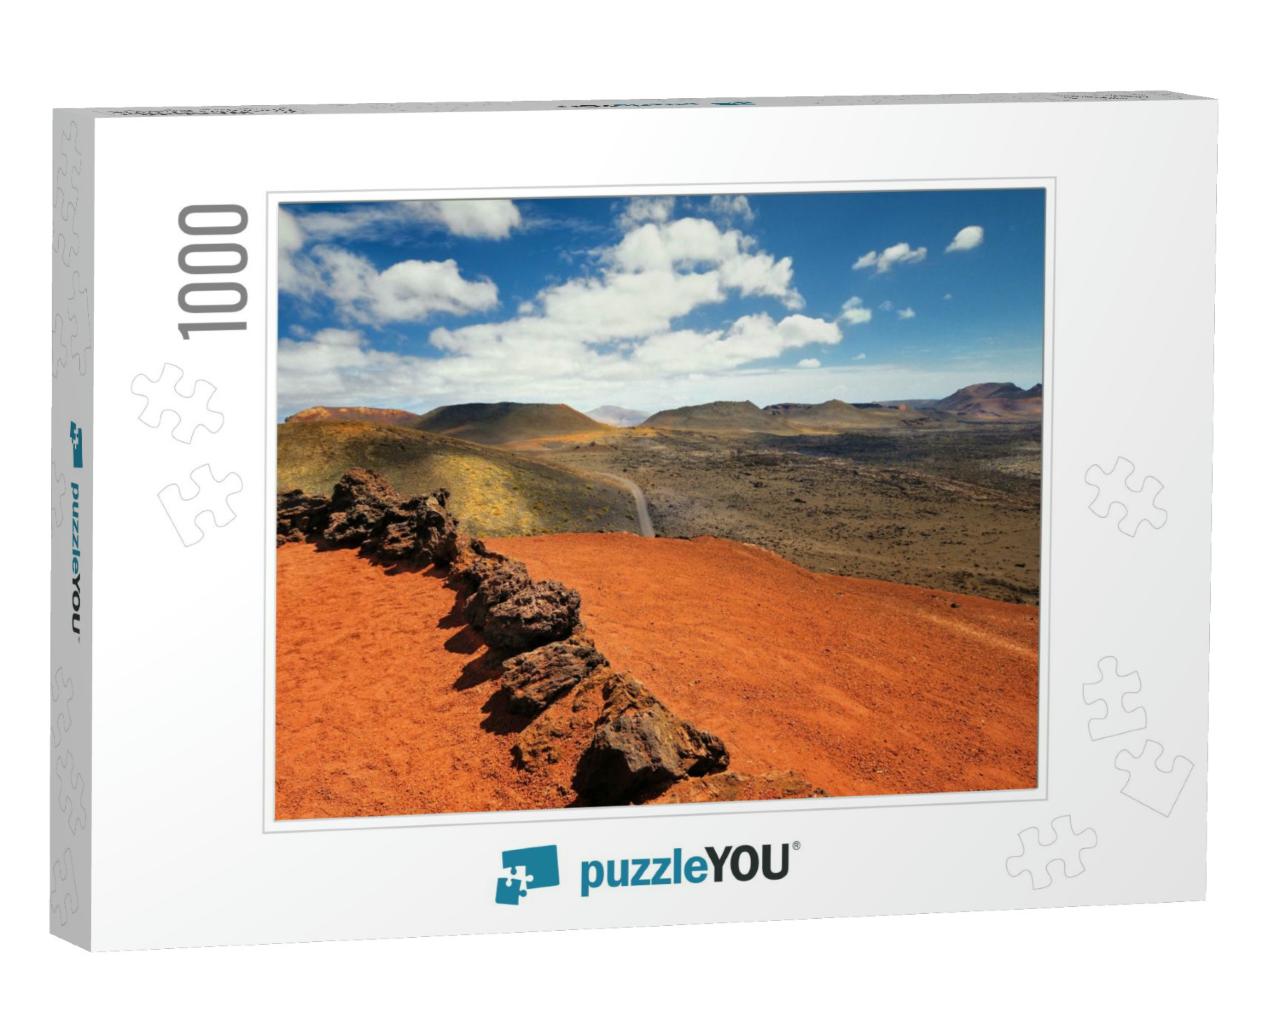 Mountains of Fire, Timanfaya National Park in Lanzarote I... Jigsaw Puzzle with 1000 pieces